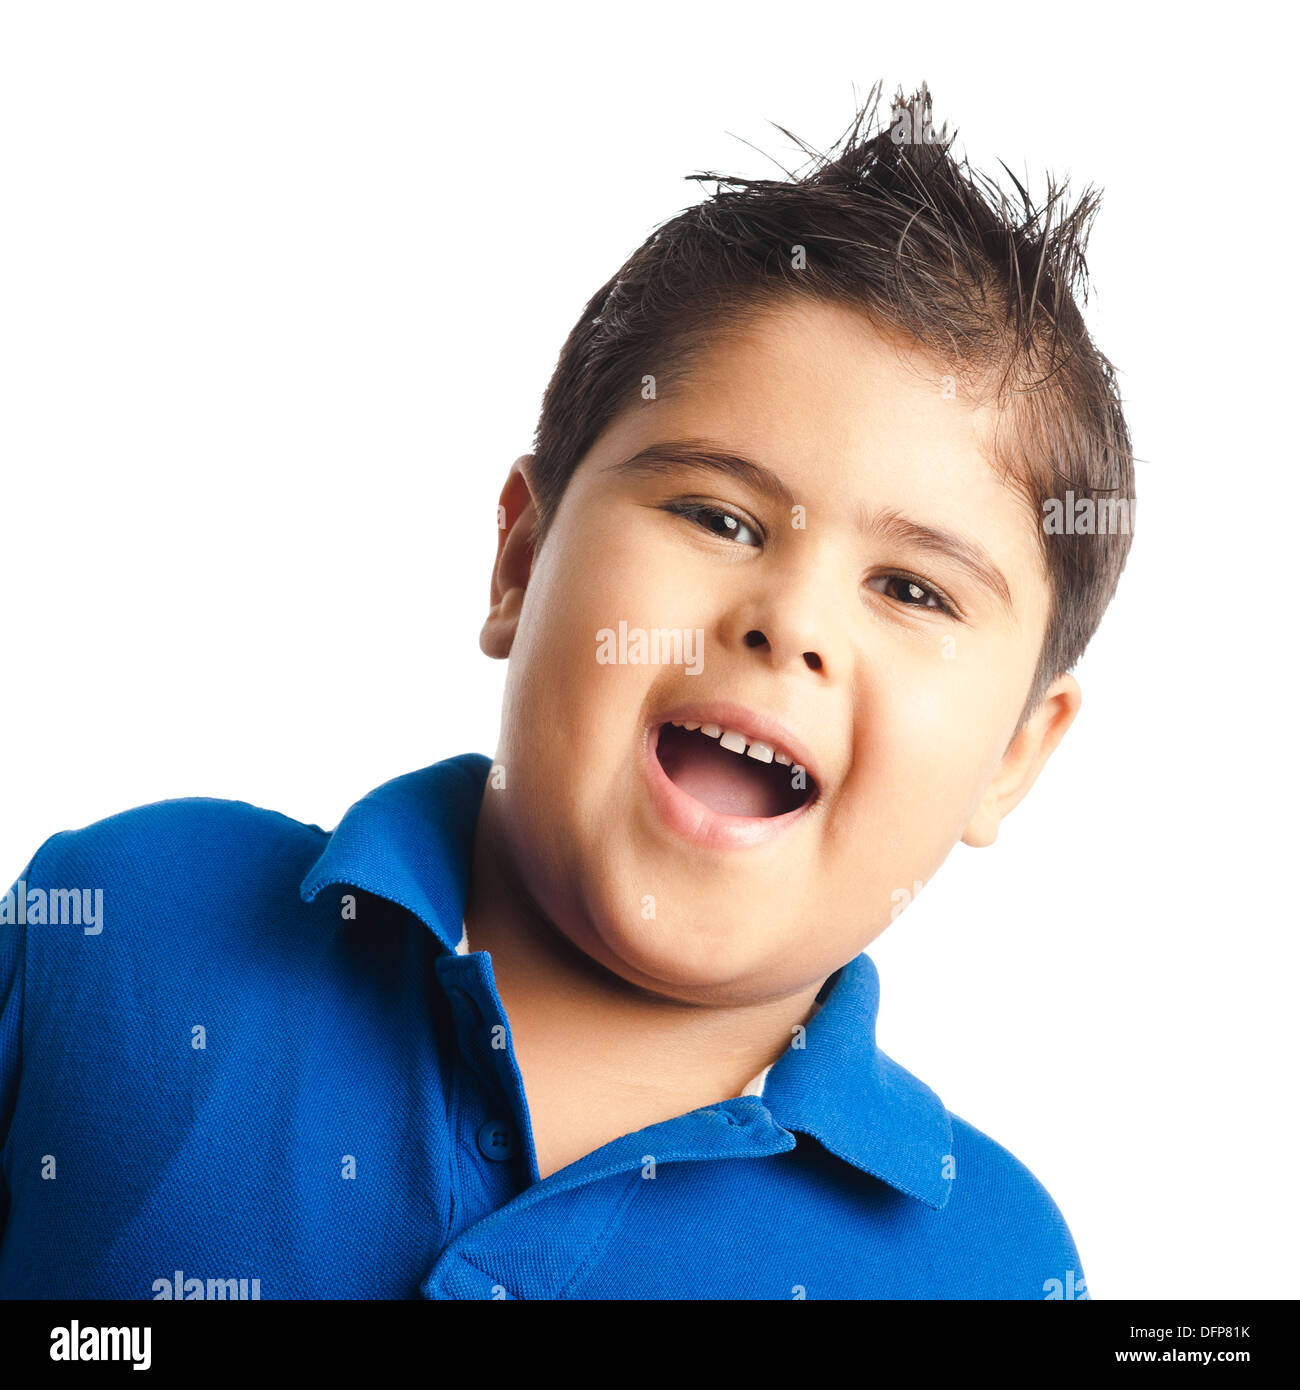 Portrait of a boy laughing Stock Photo